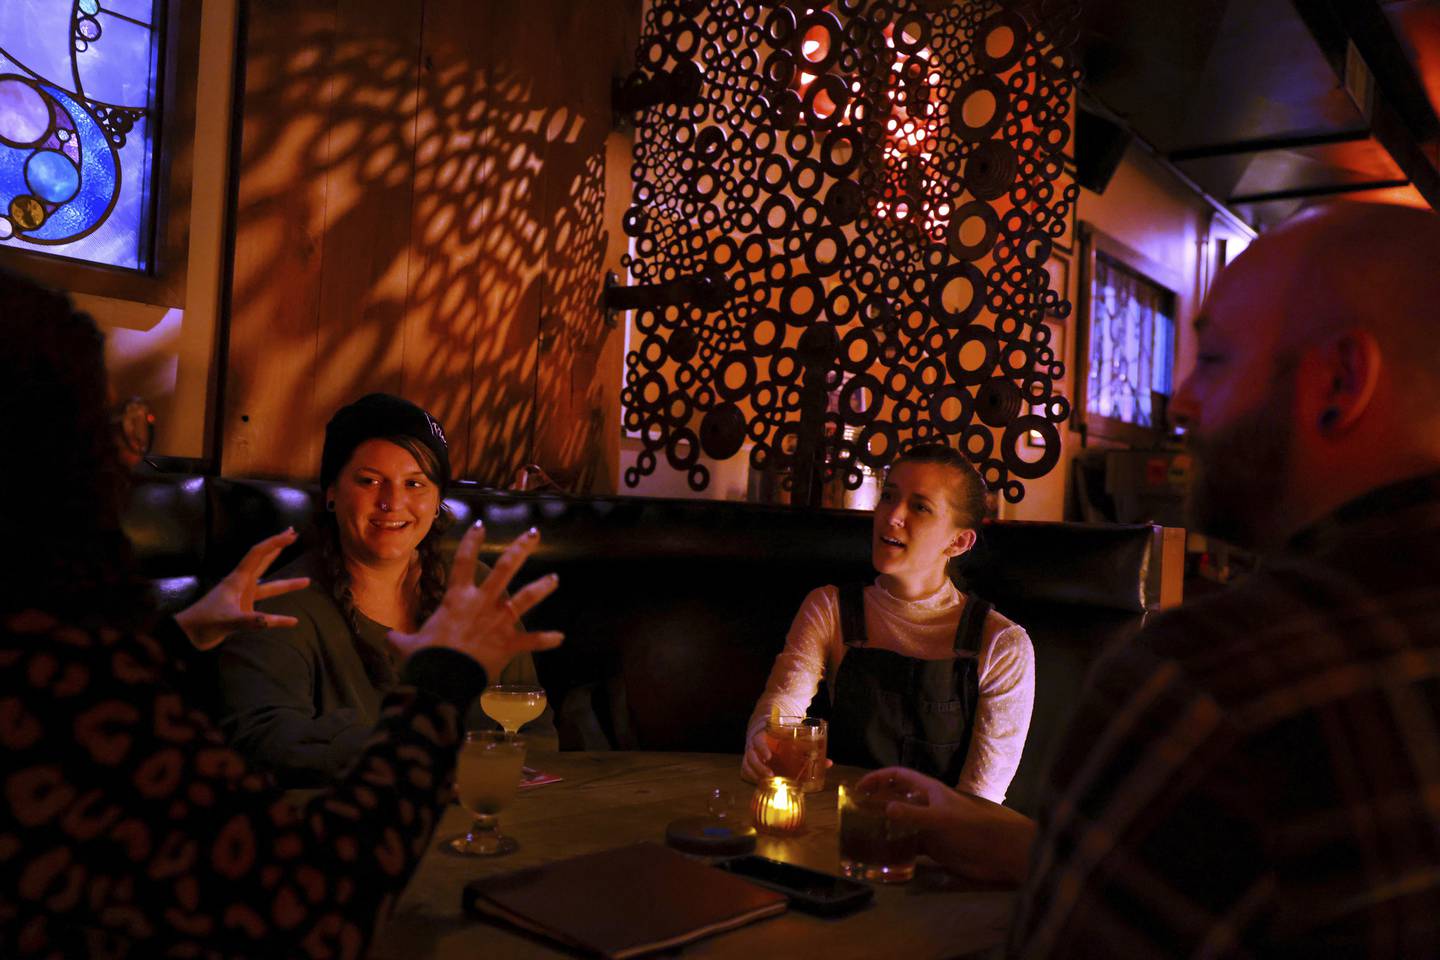 Jen Scarlato, center left, and Kayla Klammer, center right, hang out with friends at the Long Room on Irving Park Road at Ashland Avenue in Chicago on Oct. 6, 2022.  